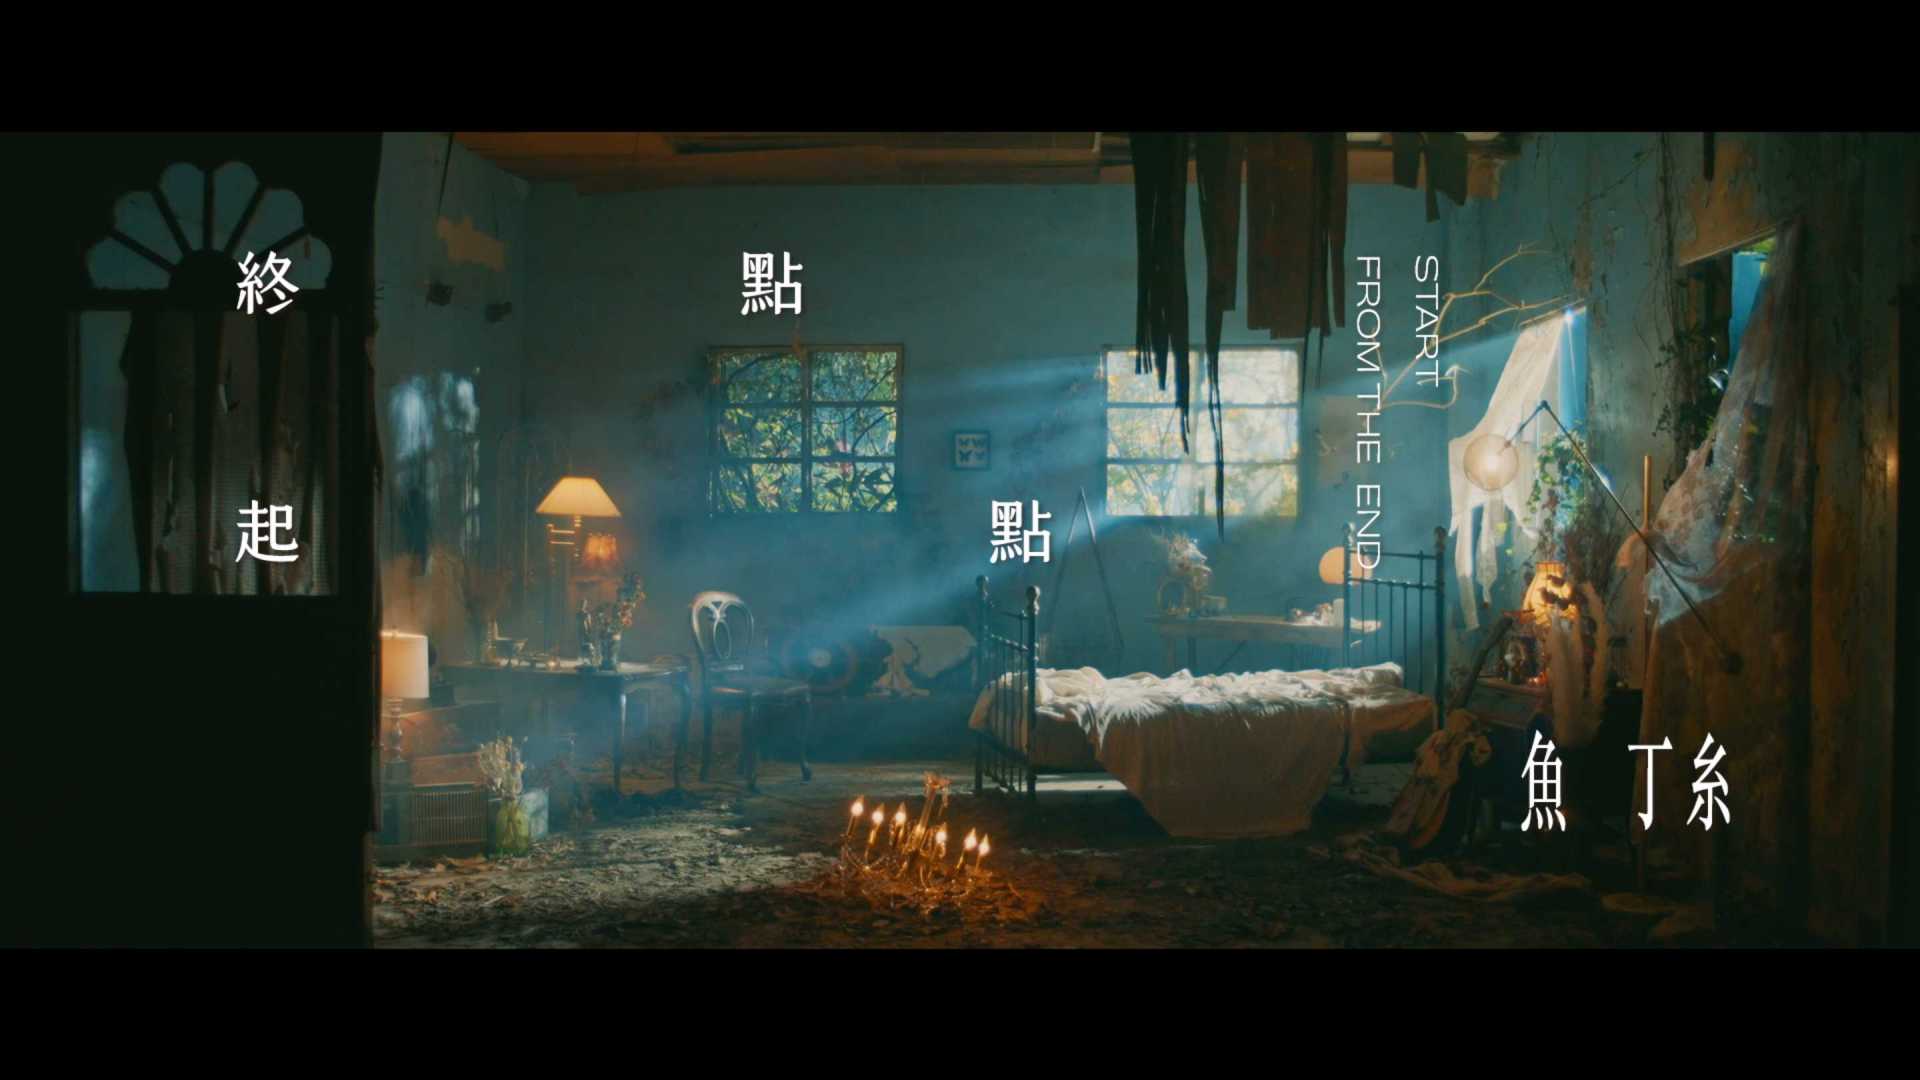 MV｜魚丁糸oaeen【終點起點 Start from The End】